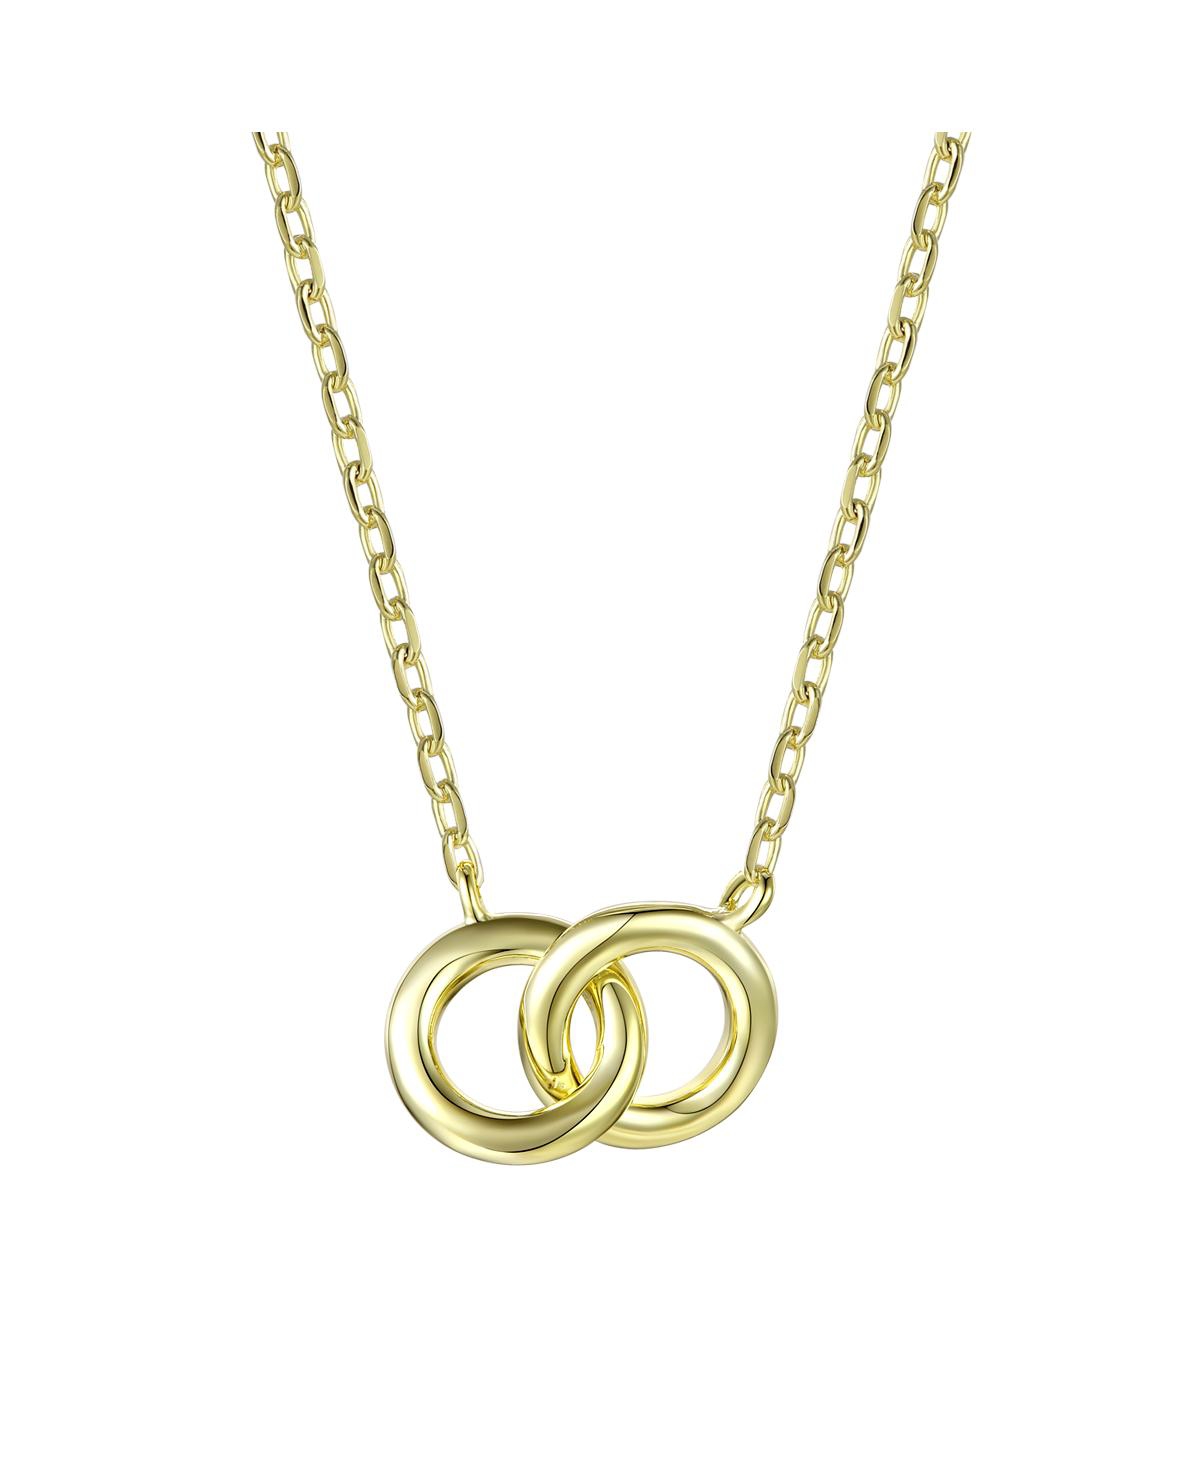 Teens/Young Adults 14K Gold Plated Cubic Zirconia Two overlapping Rings Necklace - Gold